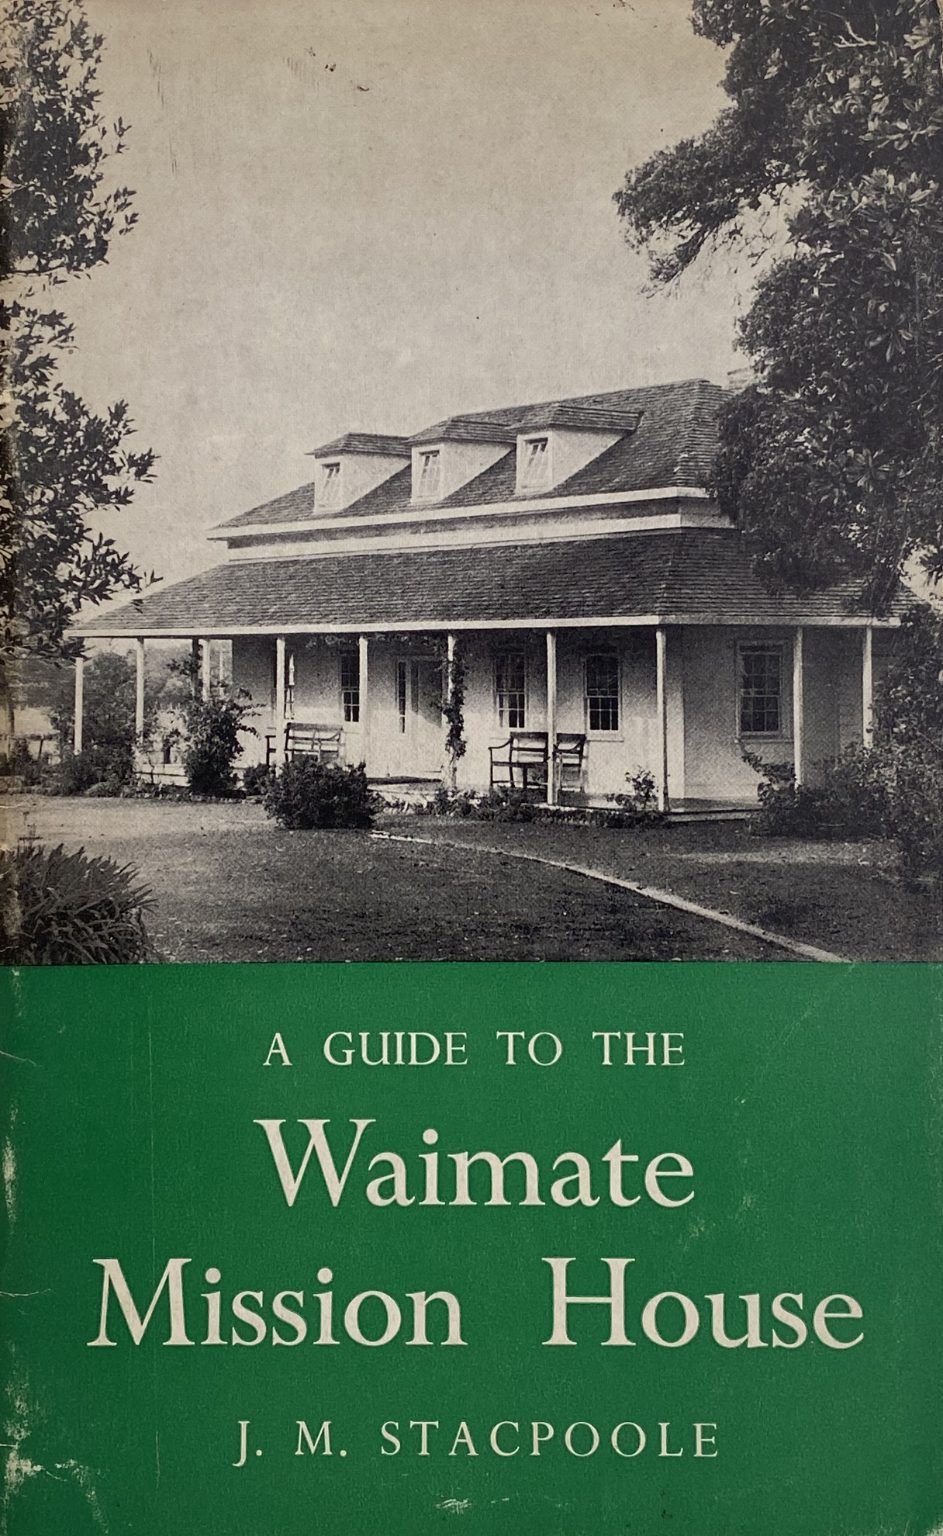 THE WAIMATE MISSION HOUSE: A Guide to